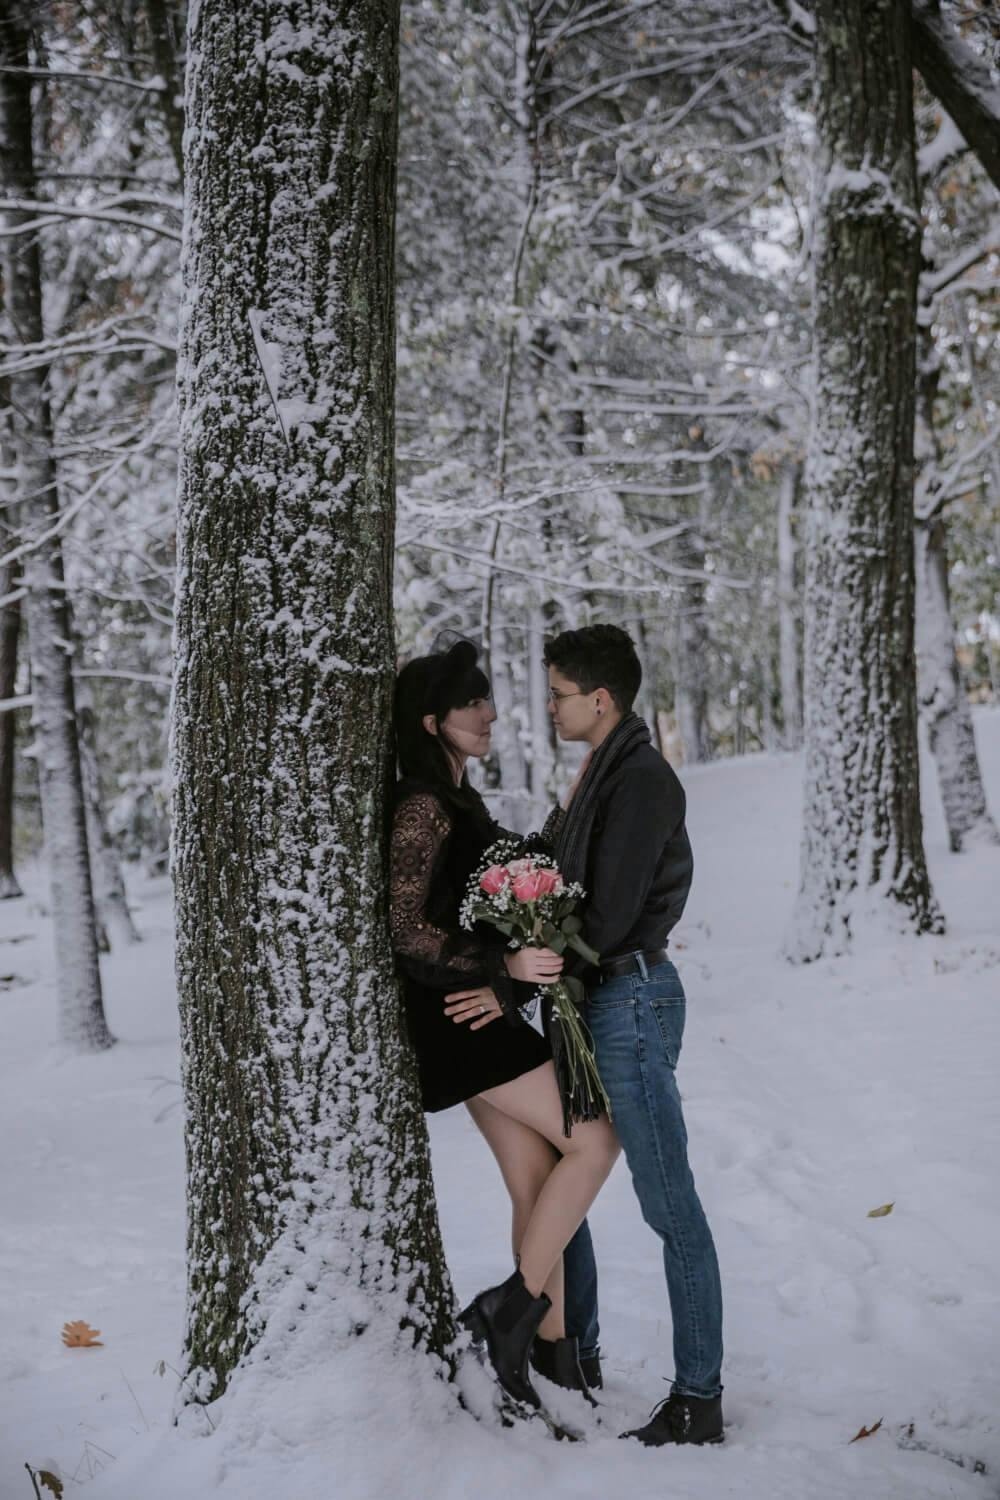 A couple embracing by a tree in a snowy forest